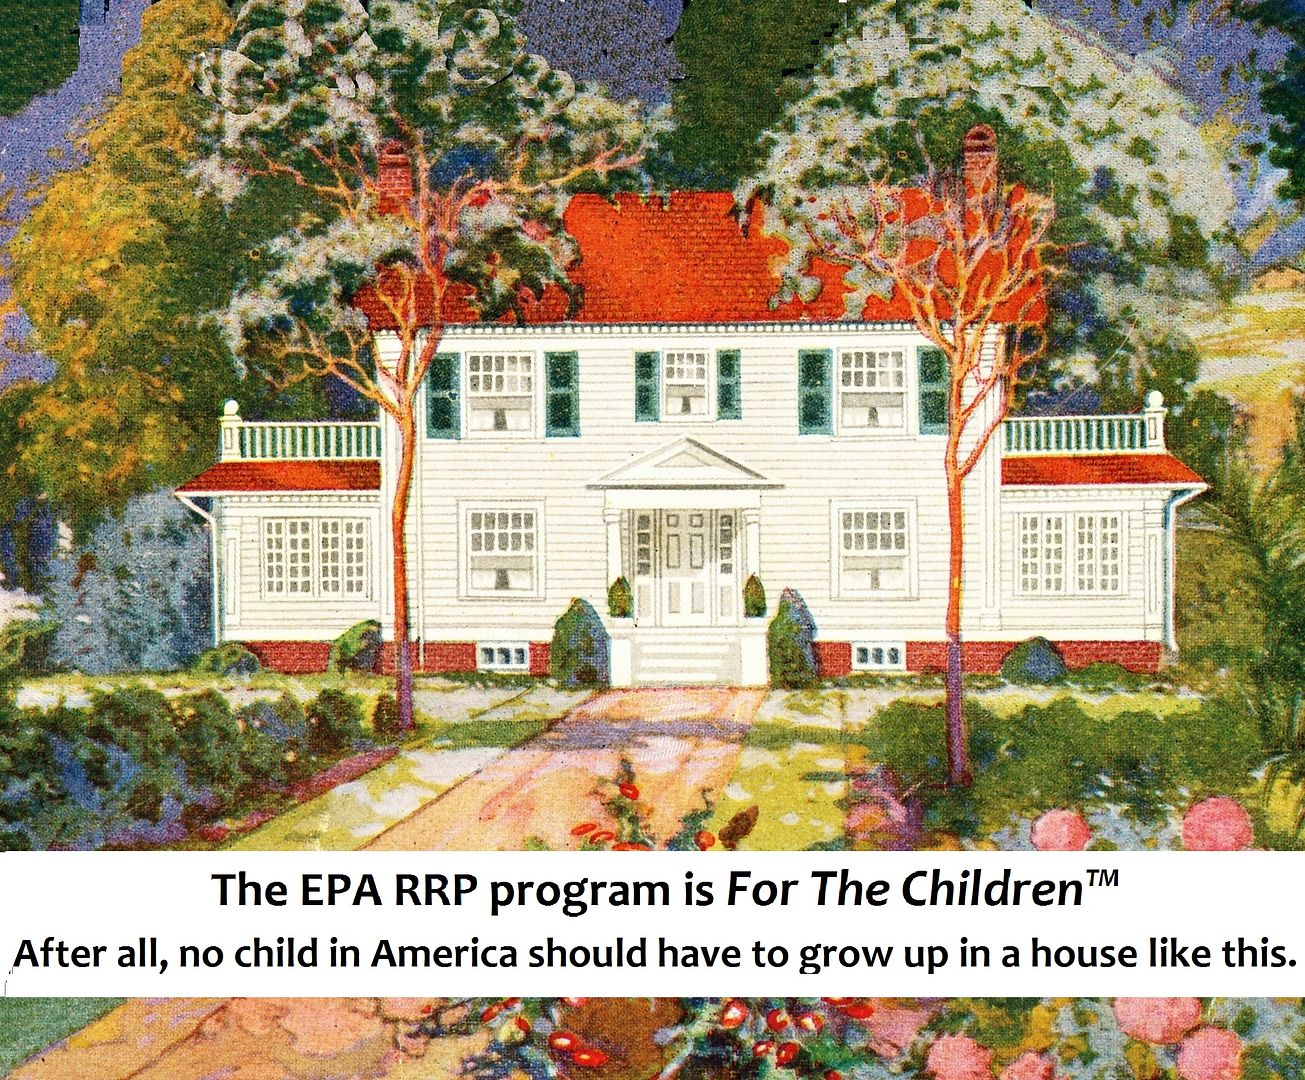 An advance copy of a new promotional campaign by the EPA